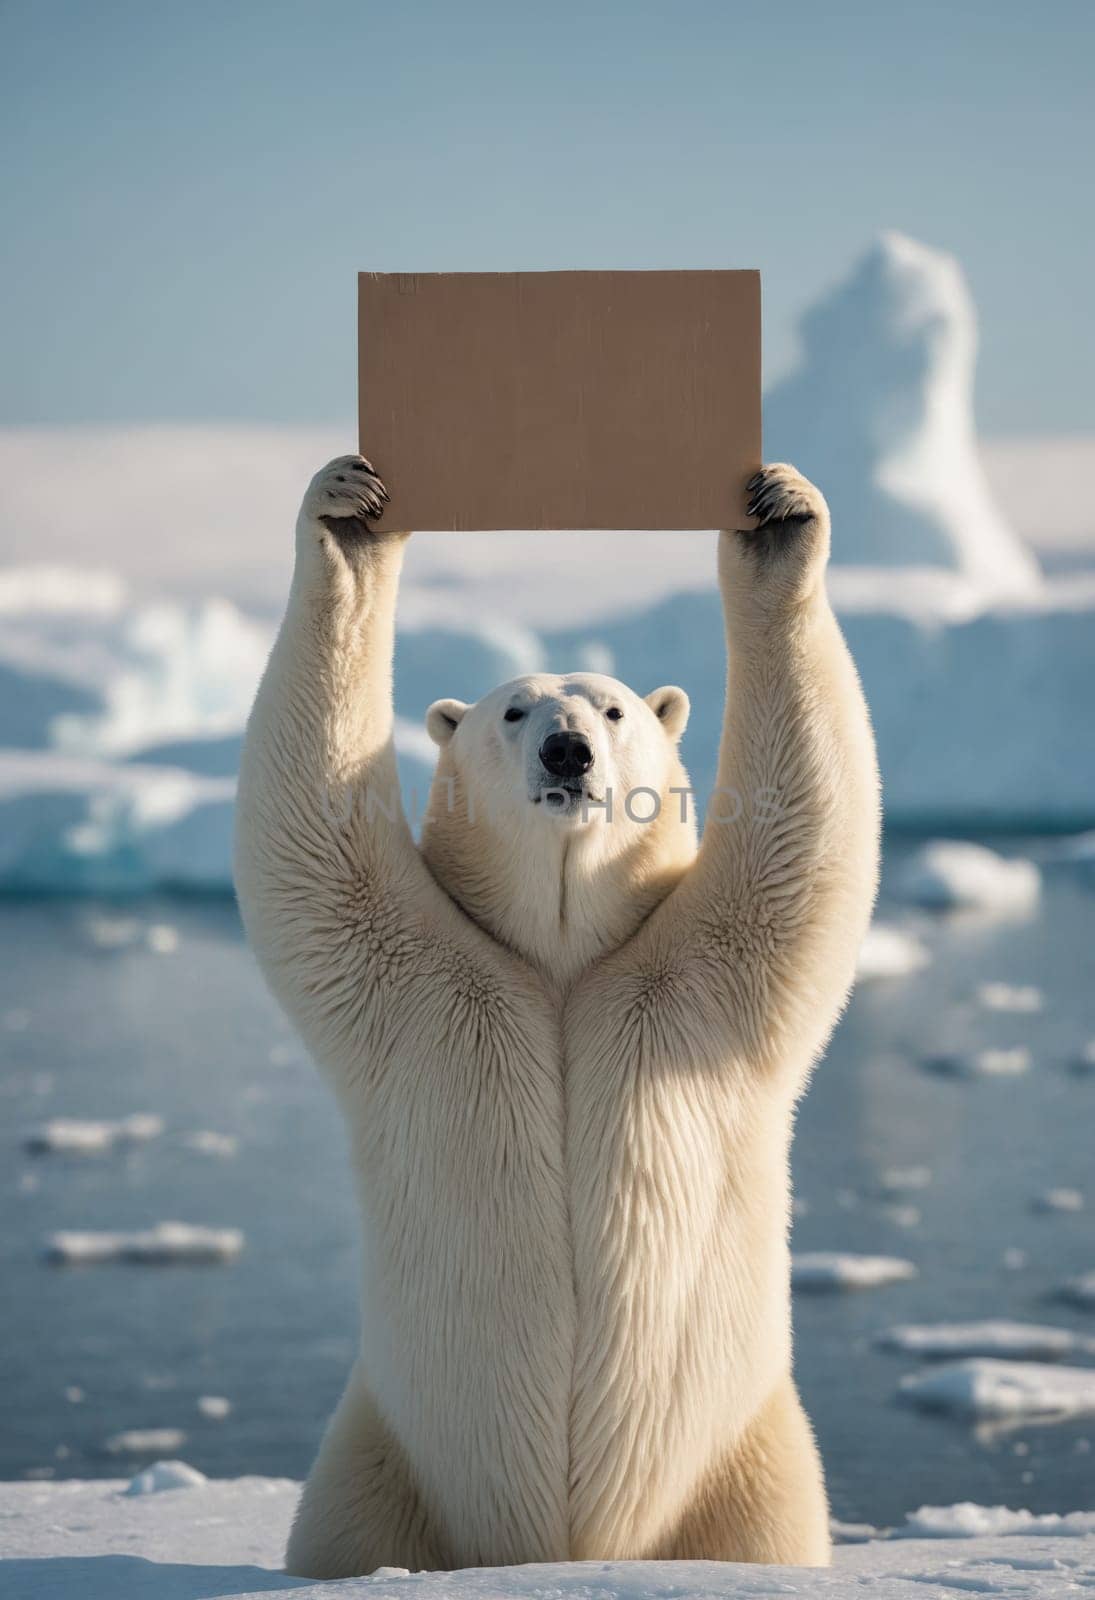 Polar bear with a sign in the sky, near the Arctic ocean by Andre1ns